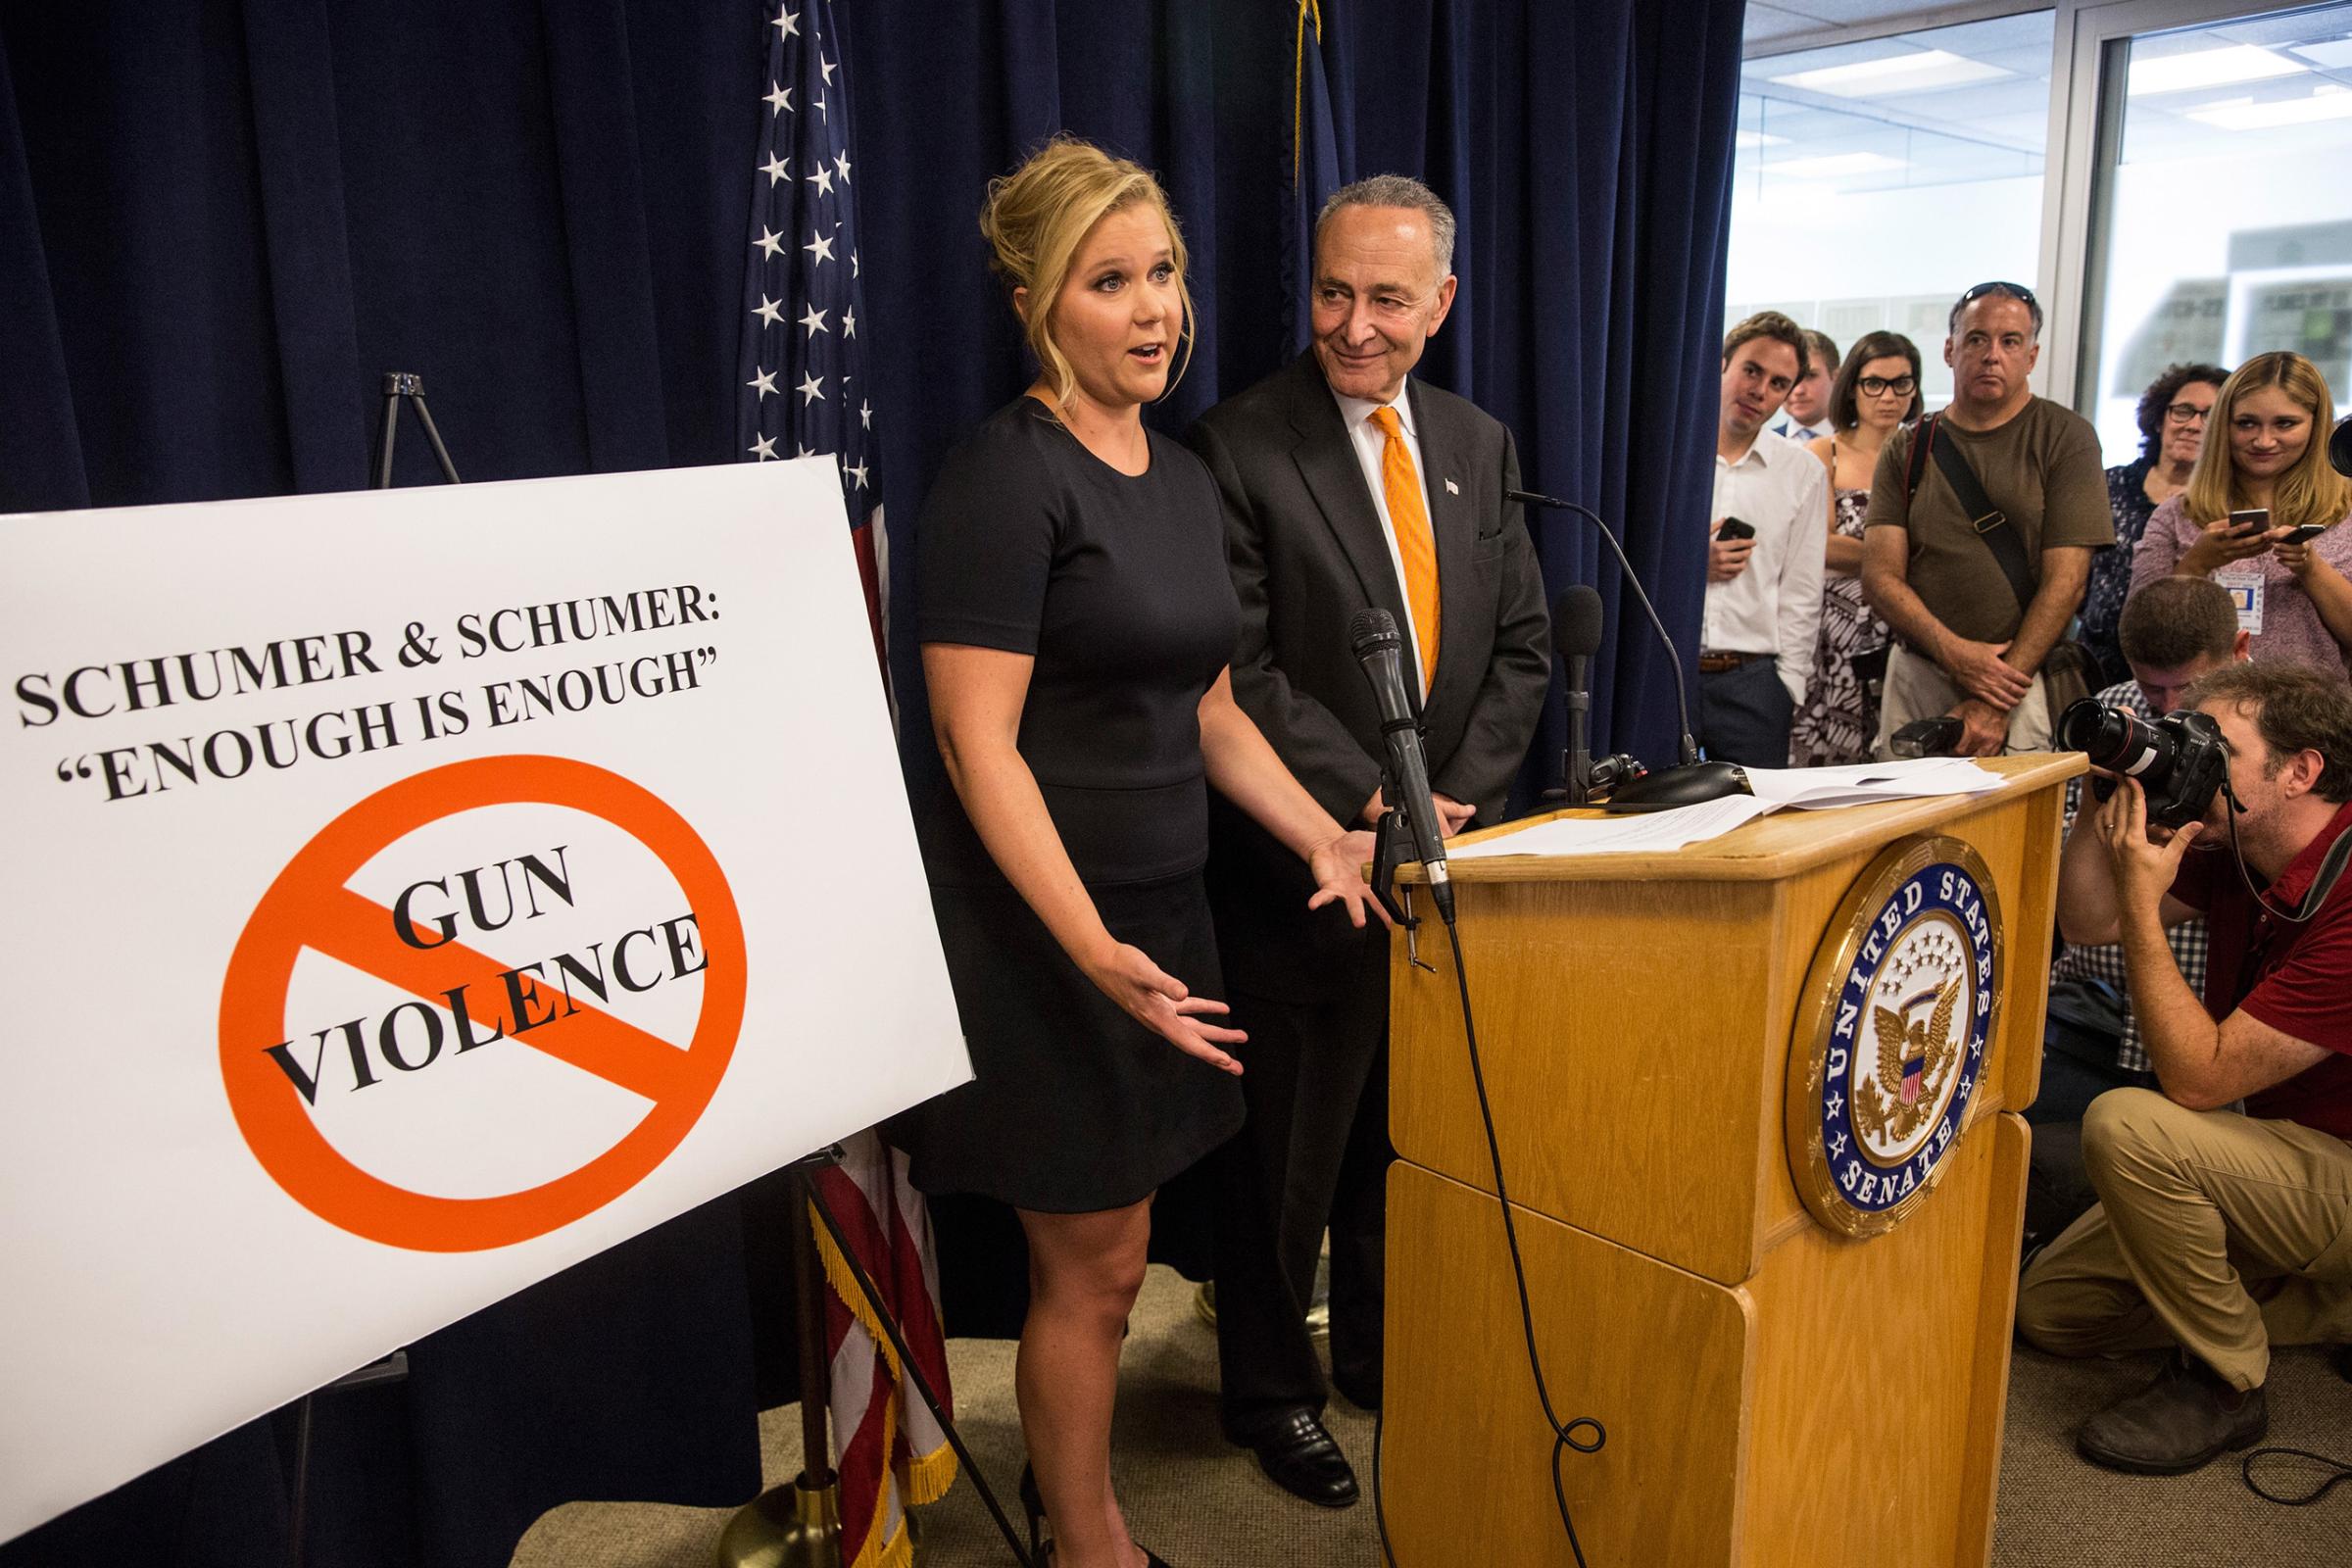 Comedian Amy Schumer (L) and her cousin Sen. Chuck Schumer (D-NY) speak at a press conference calling for tighter gun laws in an effort to stop mass shootings and gun violence in New York City, Aug. 3, 2015.